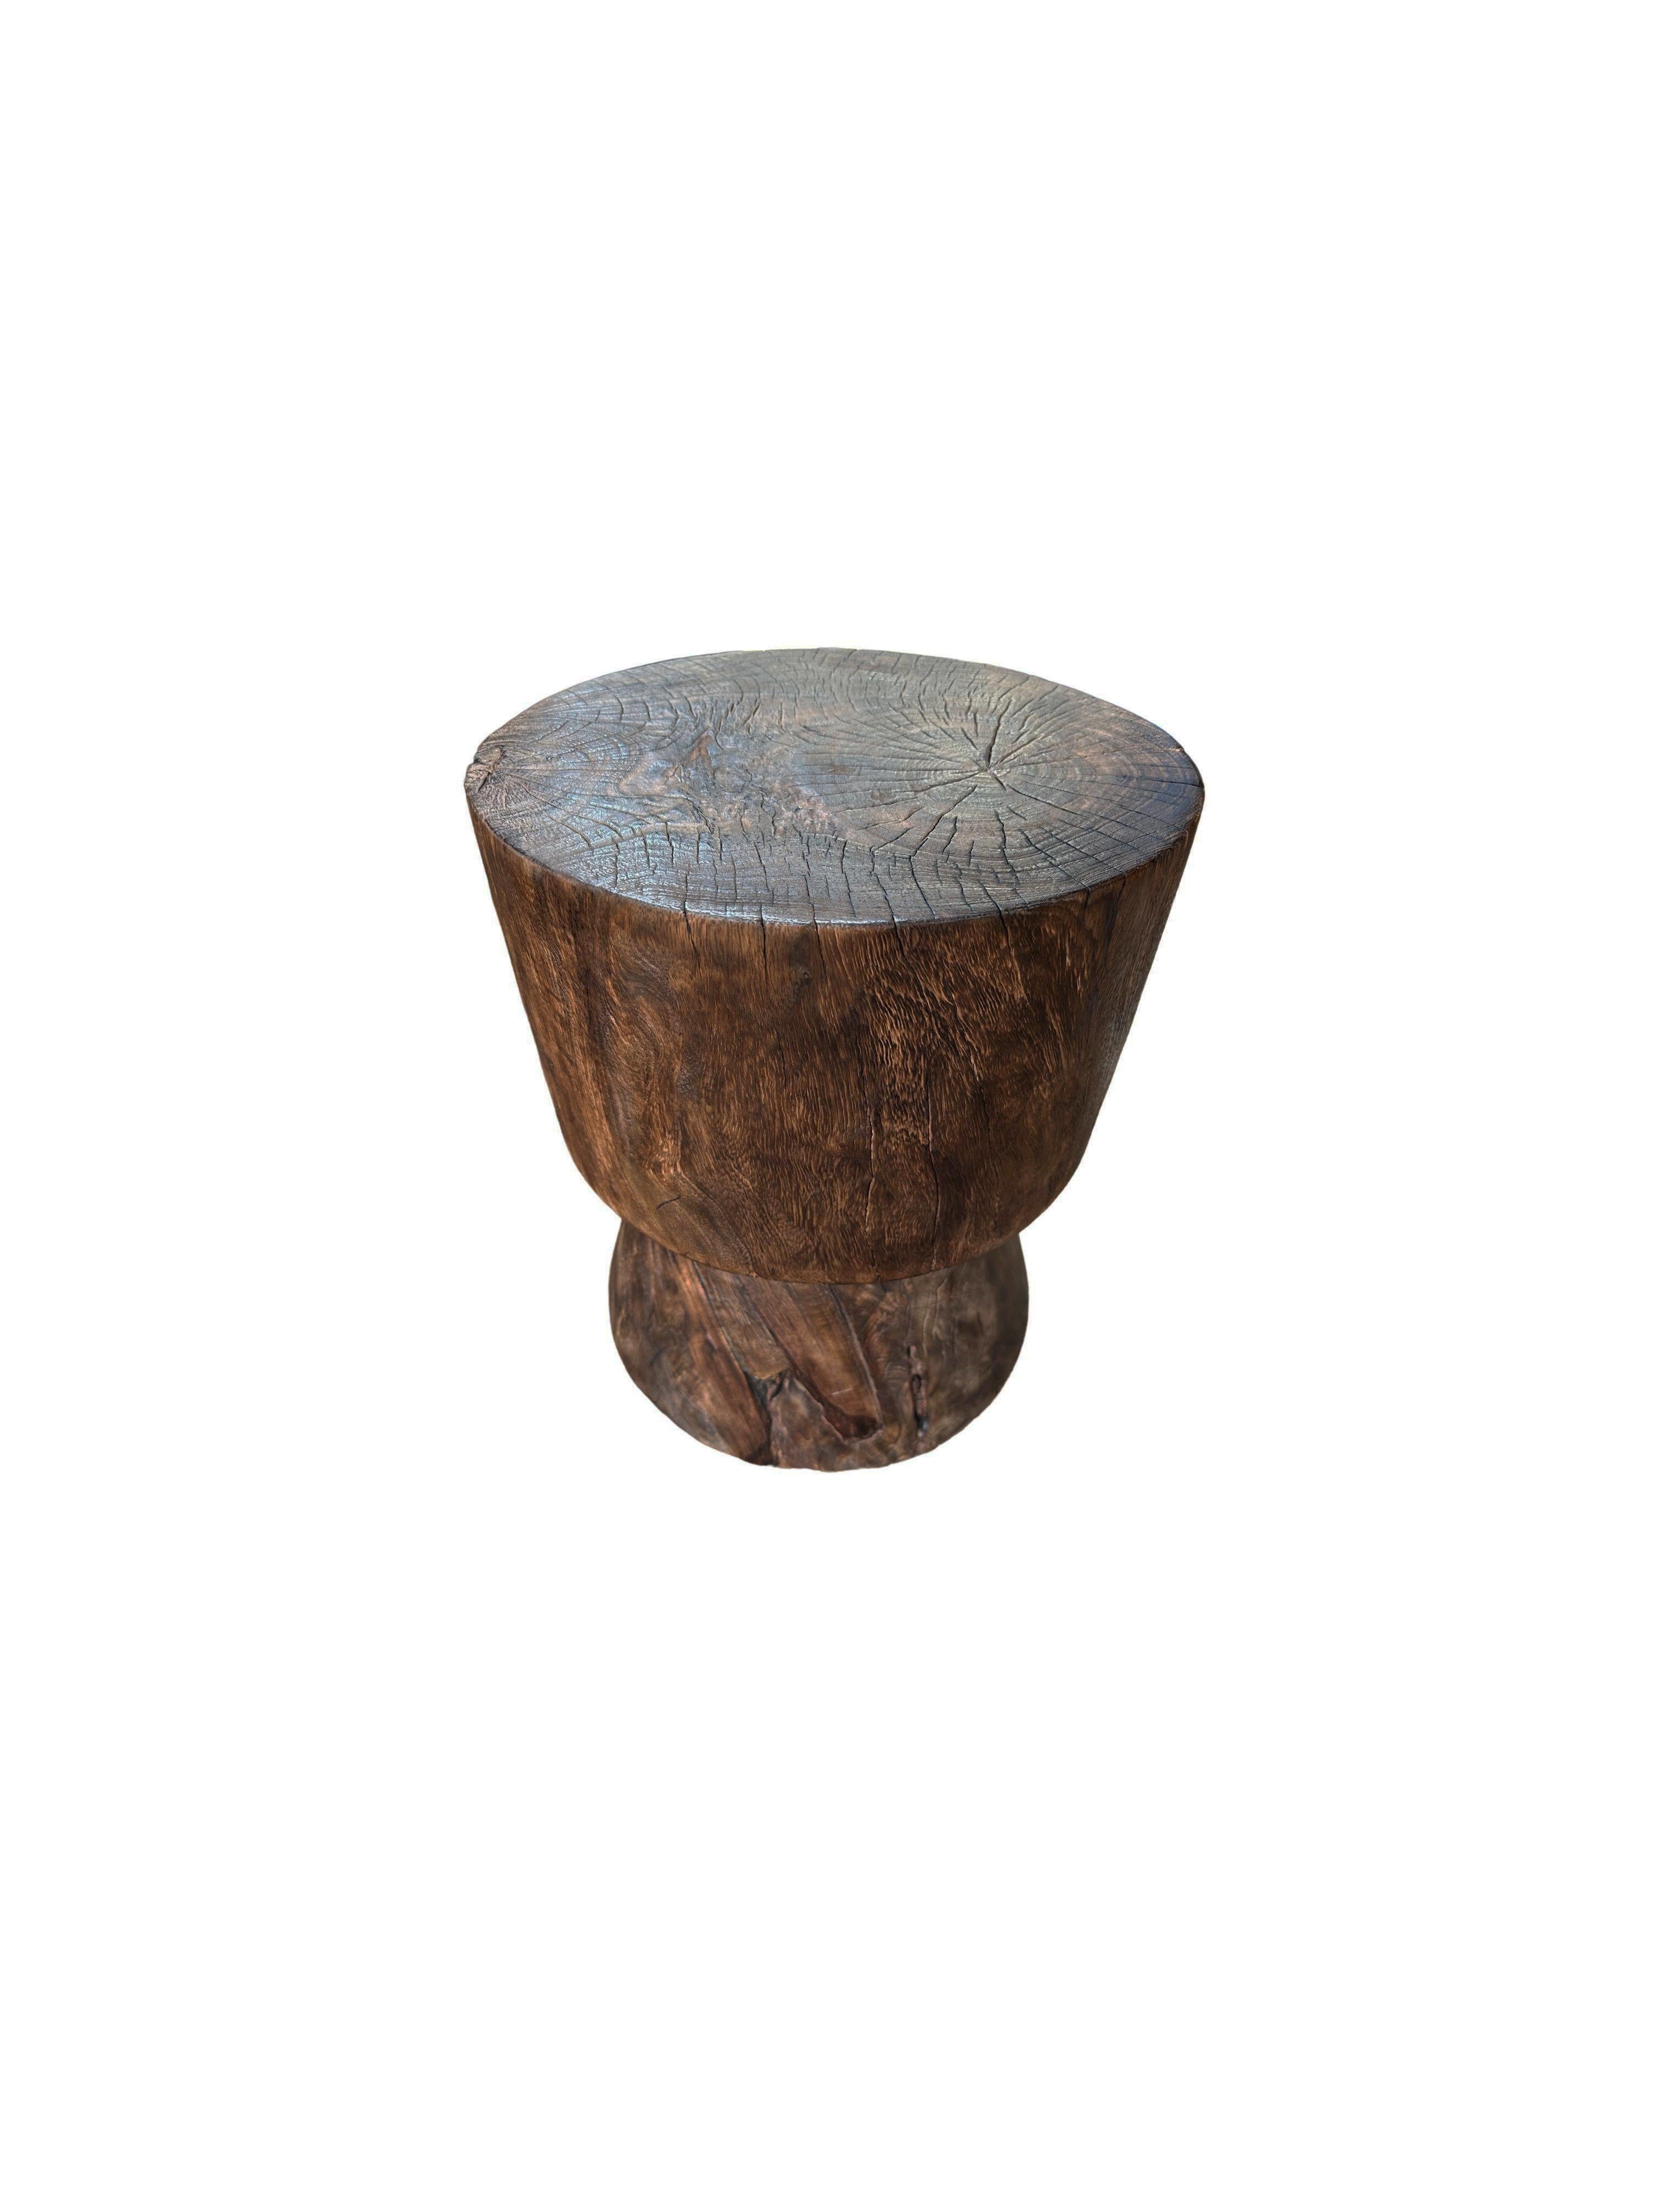 Indonesian Solid Mango Wood Side Table with Espresso Finish, Modern Organic For Sale